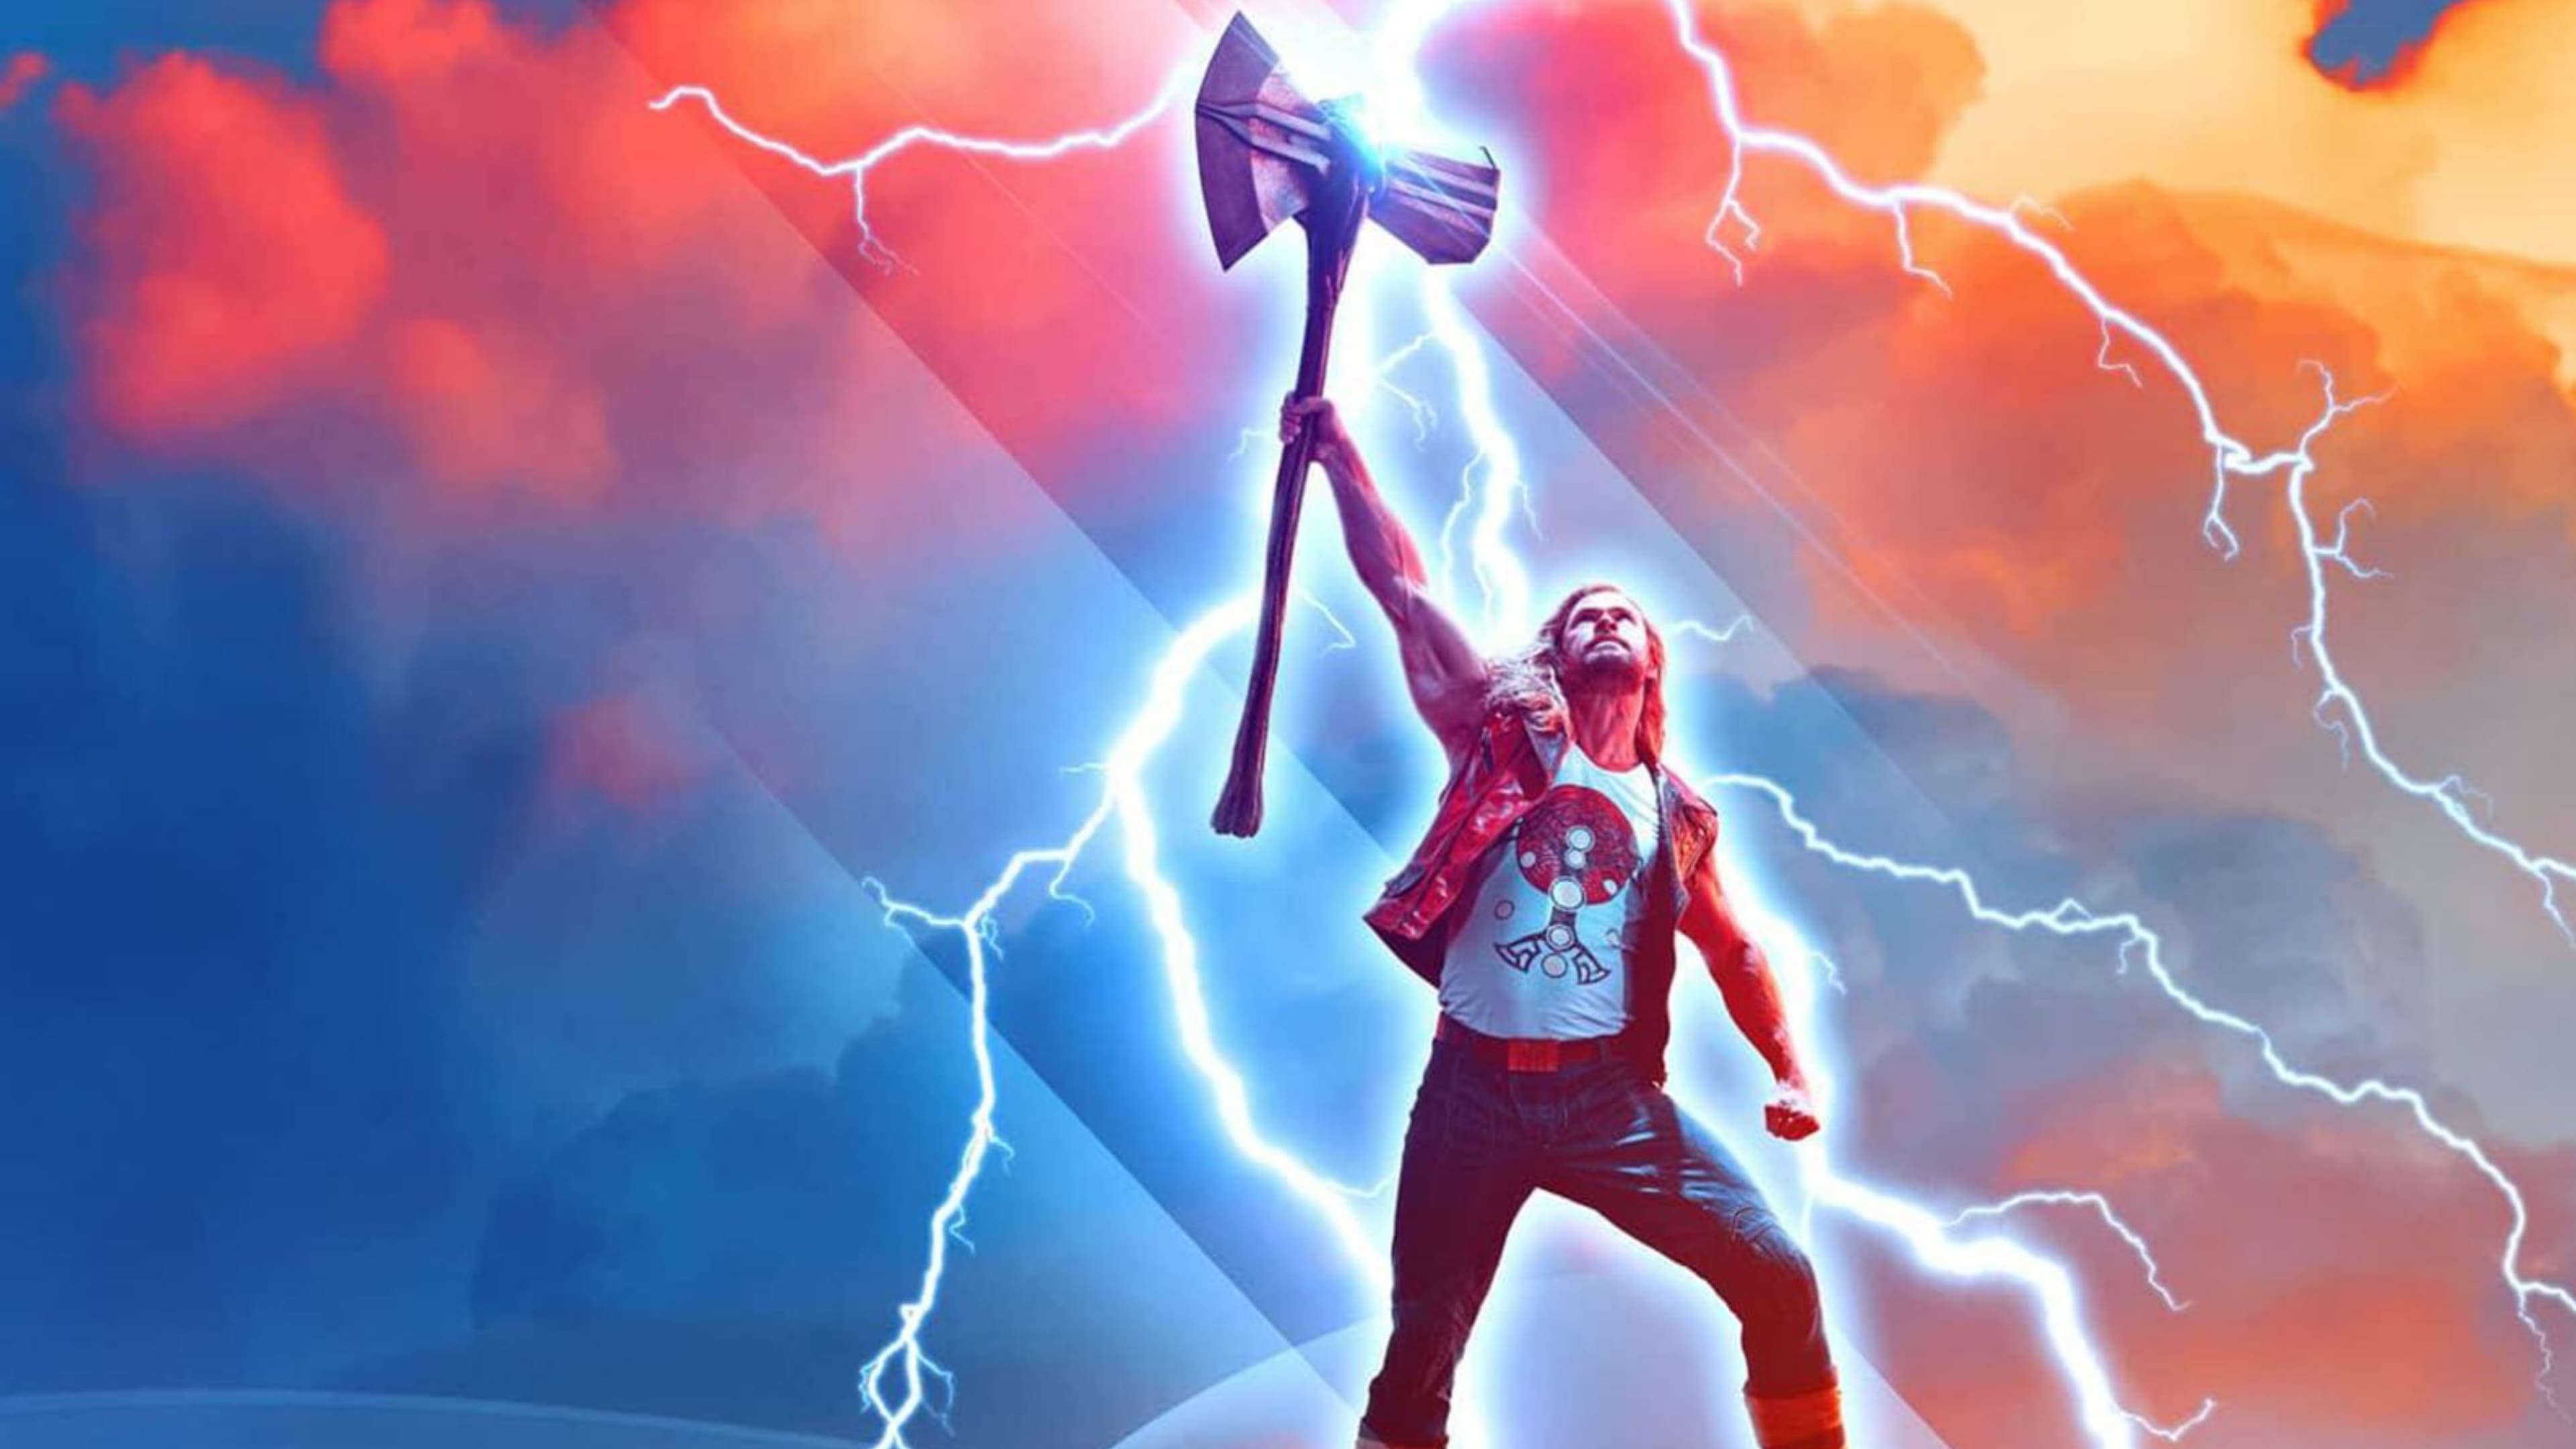 Thor 4 - Love And Thunder (2022)